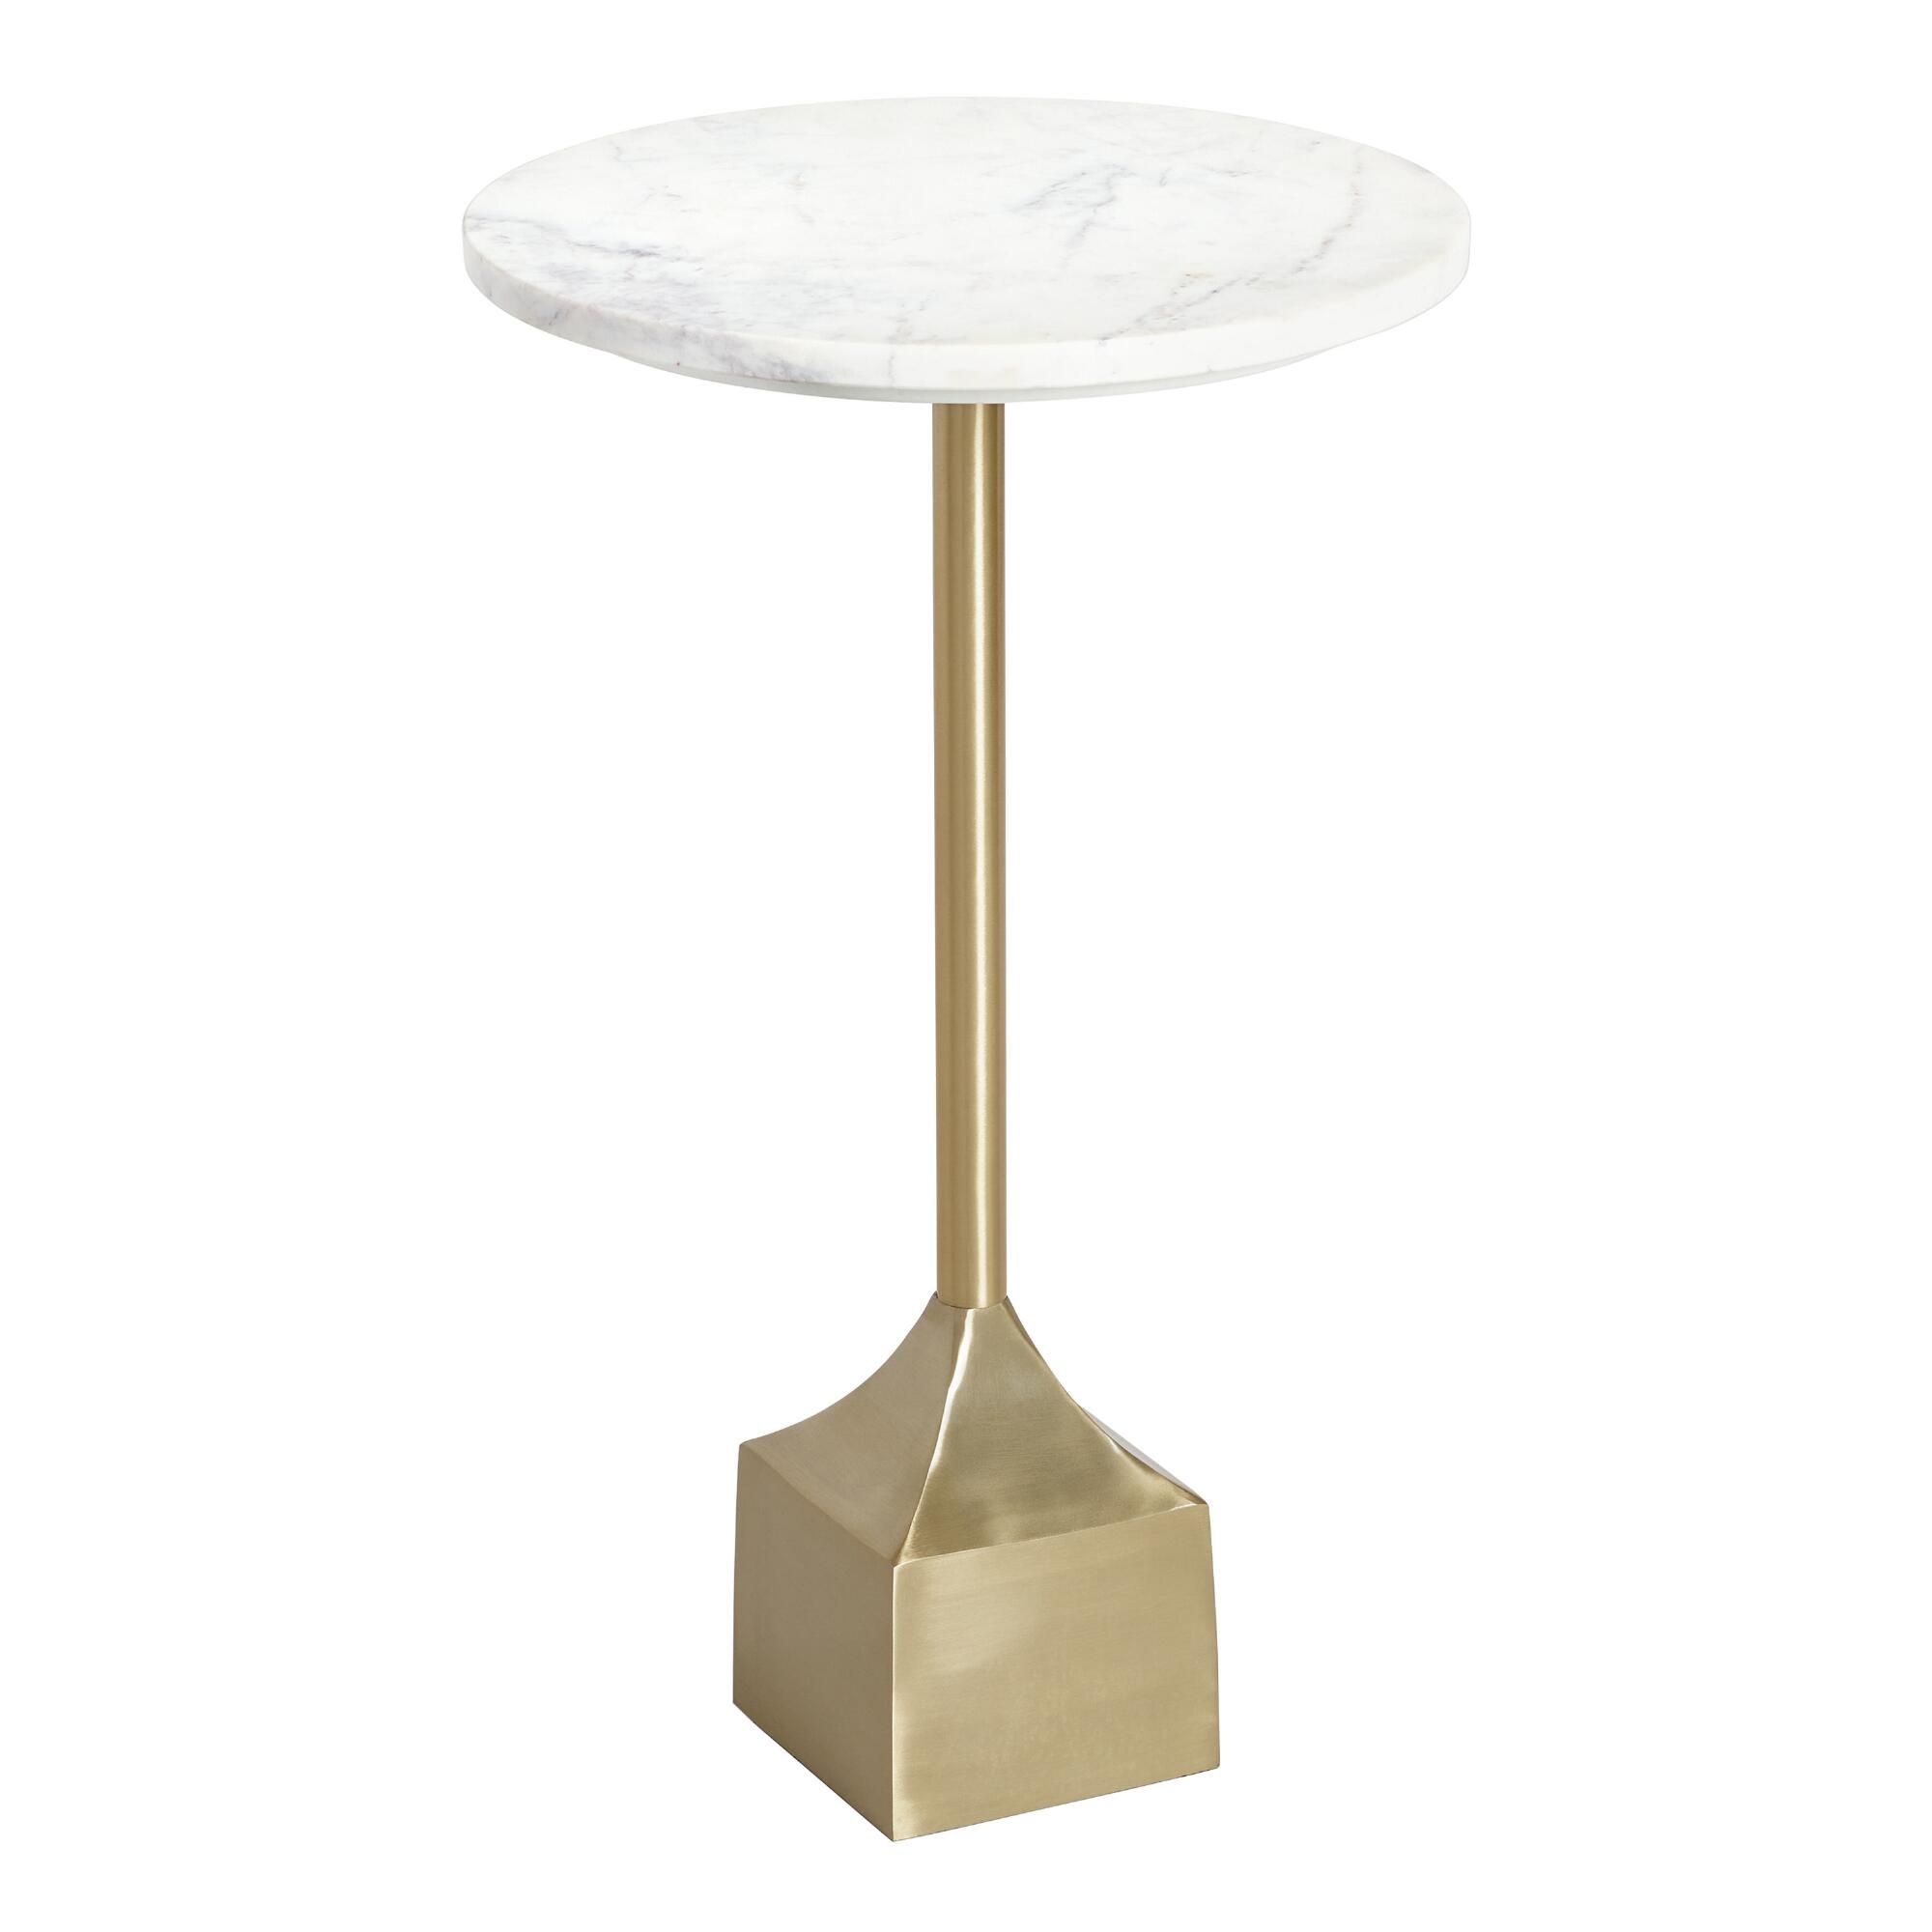 Marble and Gold Metal Norah Accent Table by World Market | World Market